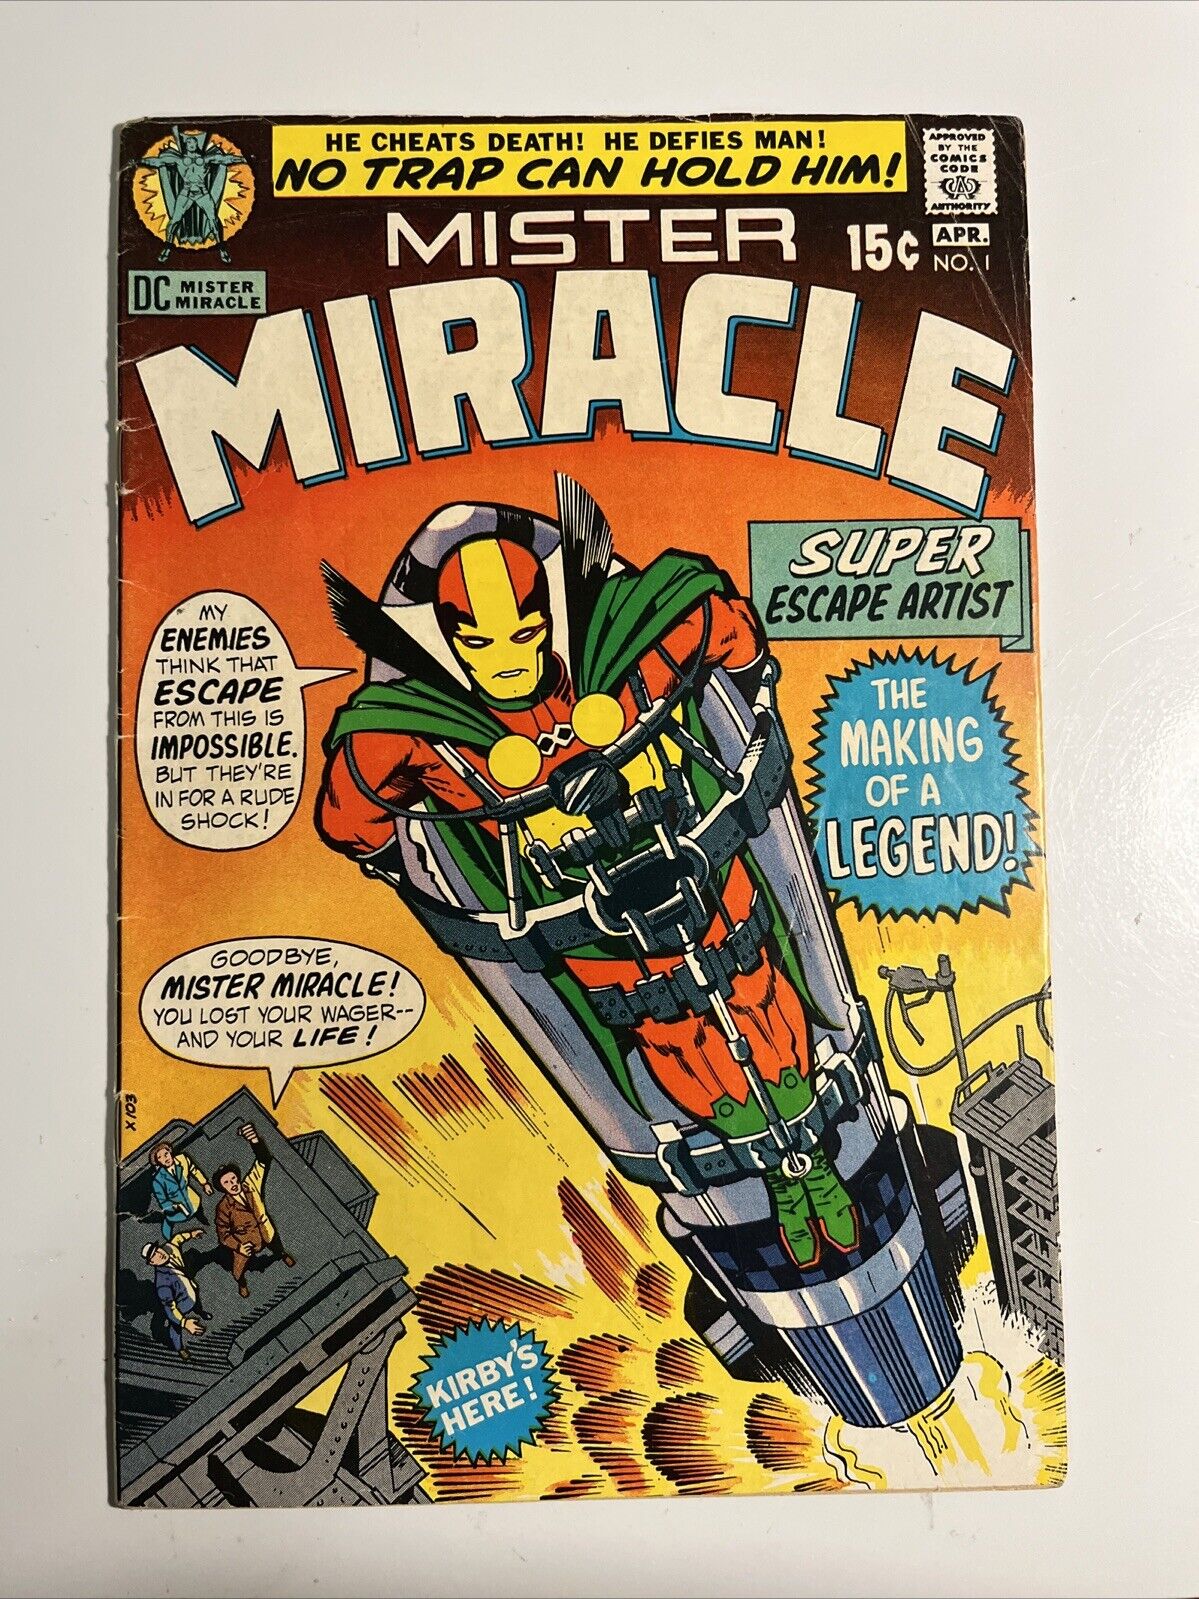 Mister Miracle #1 (DC Comics) 1st App Of Mister Miracle